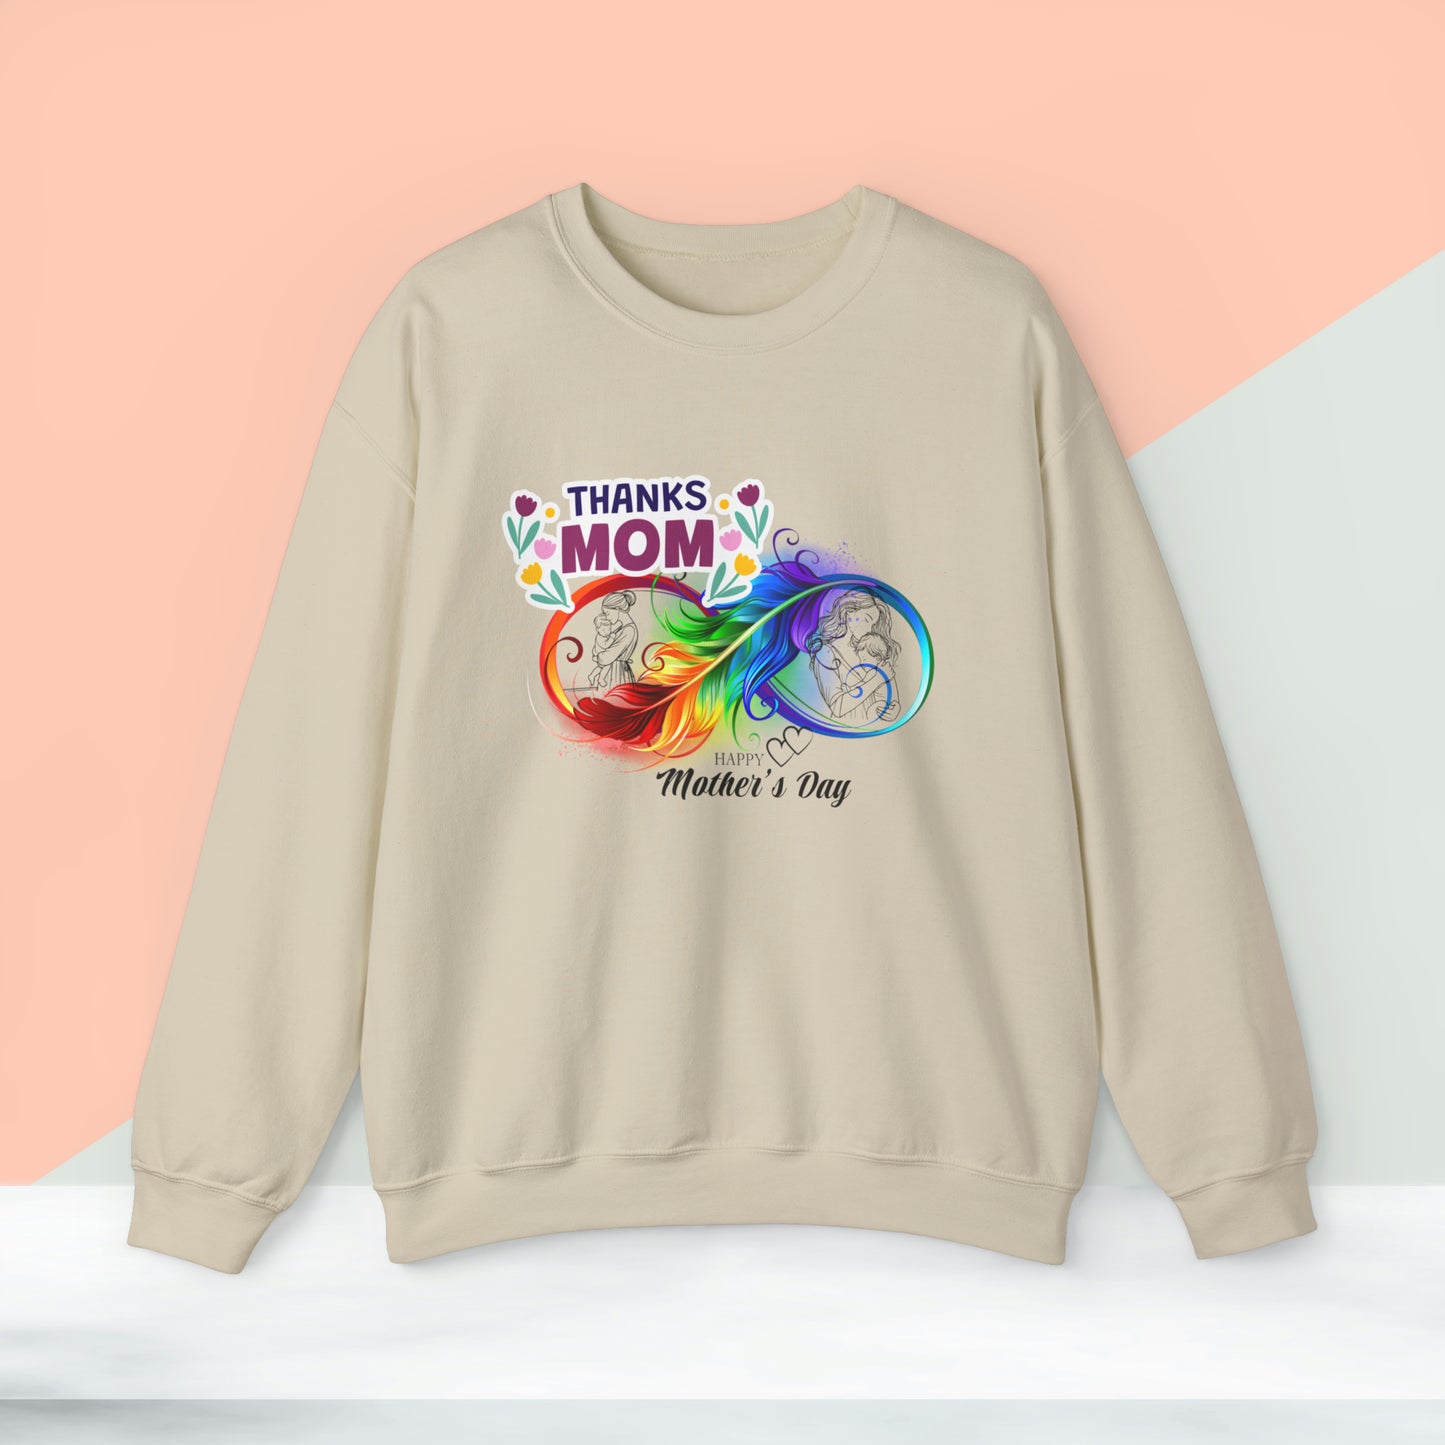 Happy Mother's Day Sweatshirt For Mom, Mom Sweatshirt, Gift For Moms,  Mama Sweatshirt.